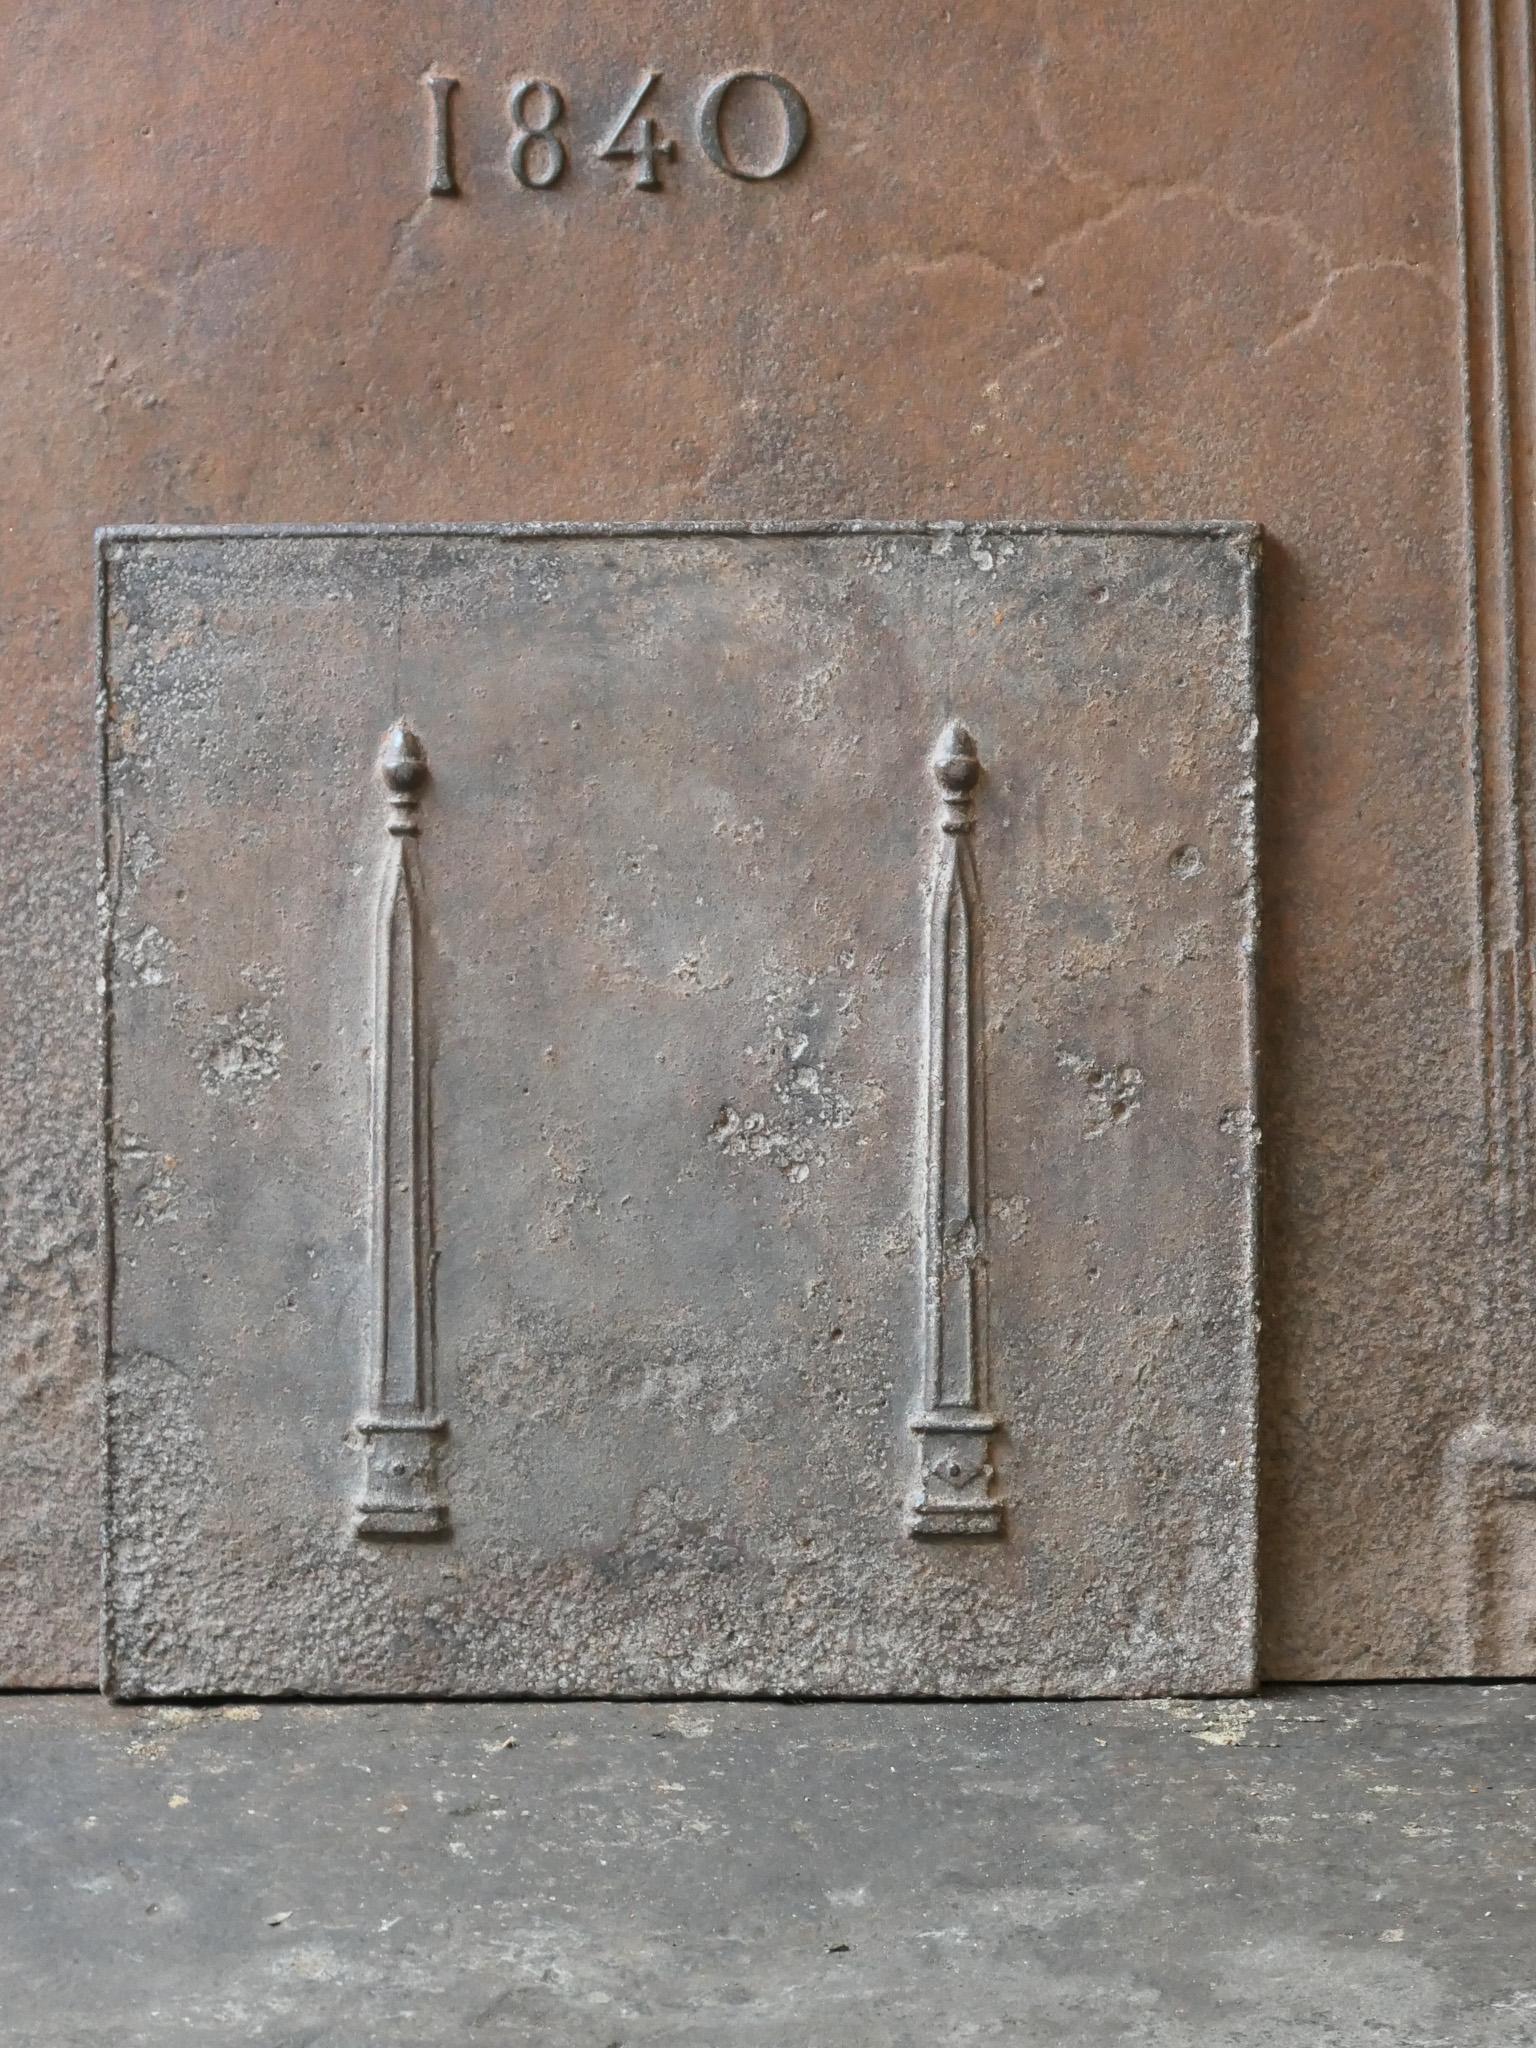 18th - 19th Century French neoclassical fireback with two pillars of freedom. The pillars symbolize the value liberty, one of the three values of the French revolution. 

The fireback is made of cast iron and has a natural brown patina. Upon